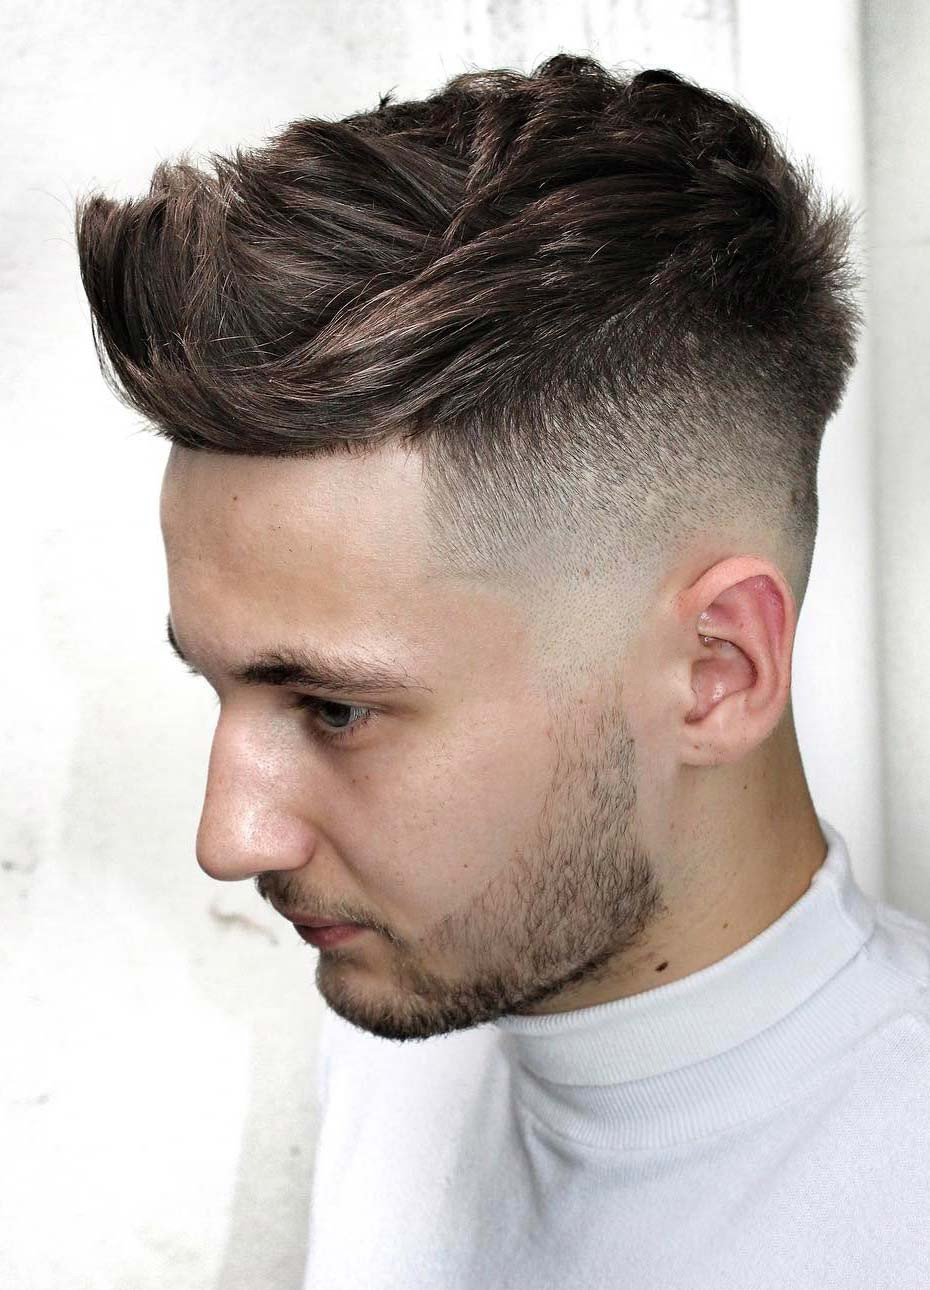 Hairstyle Undercut
 50 Stylish Undercut Hairstyle Variations to copy in 2019